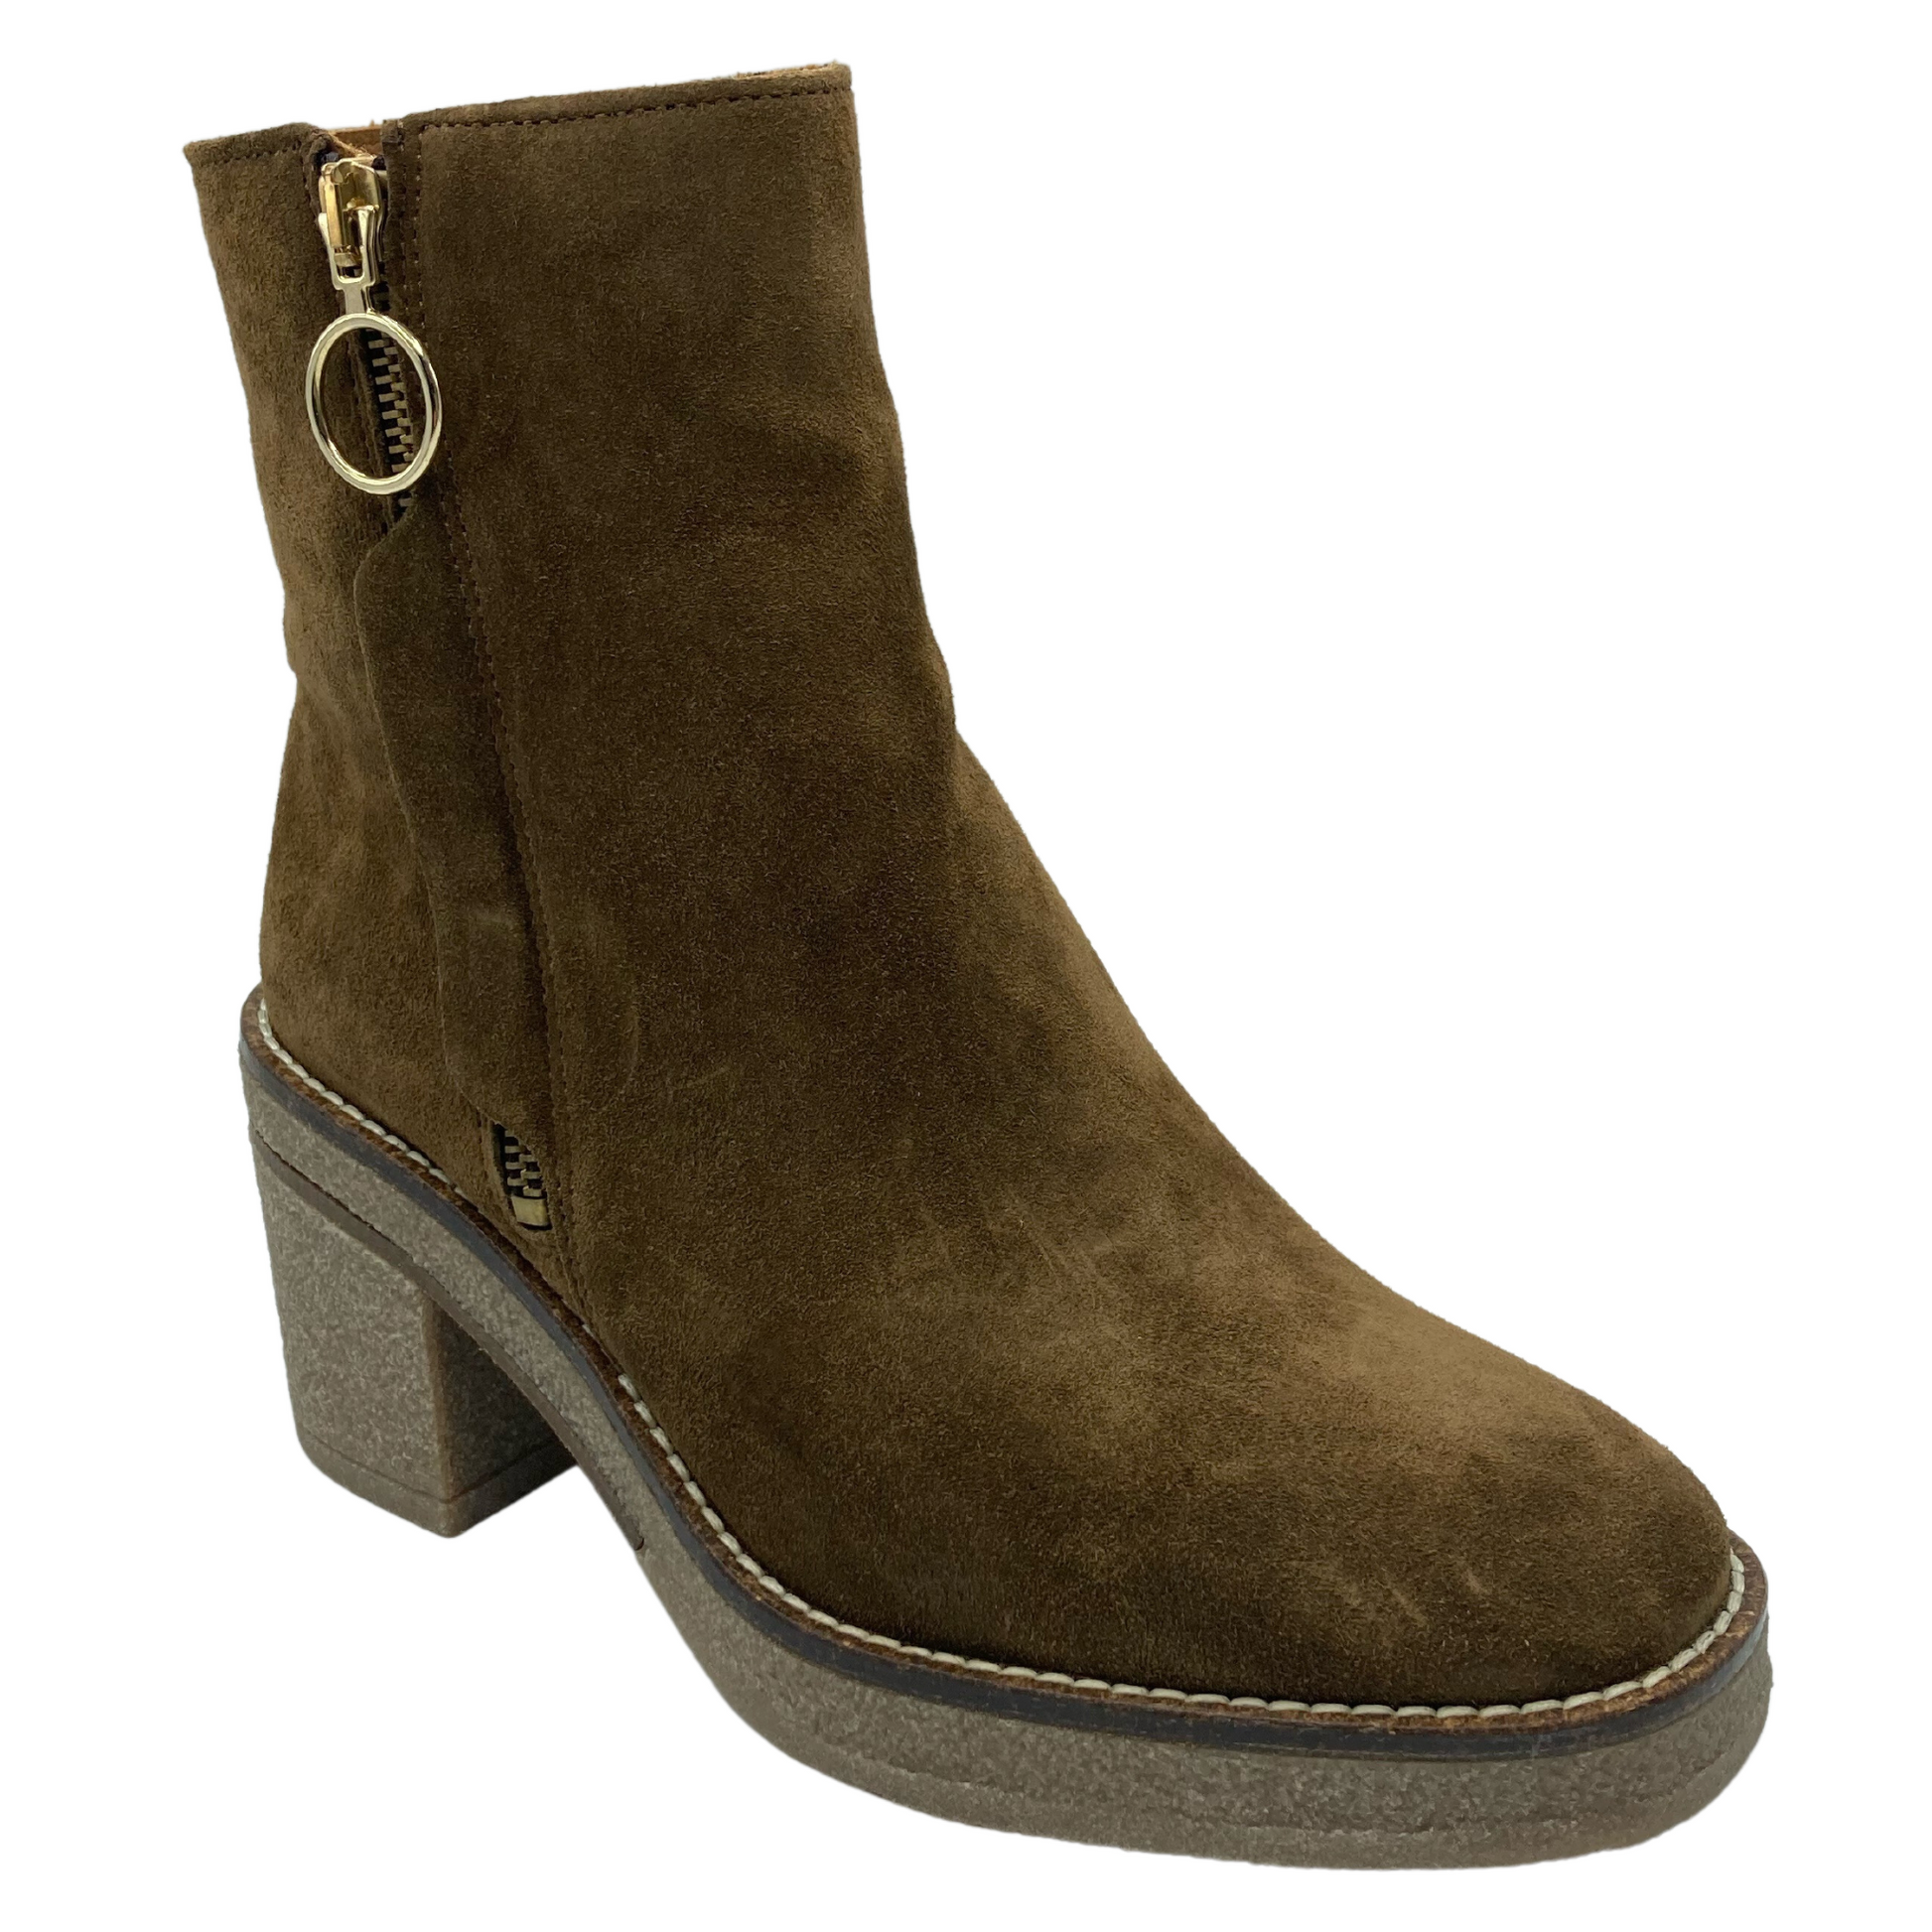 45 degree angled view of brown suede short boot with rubber sole and block heel